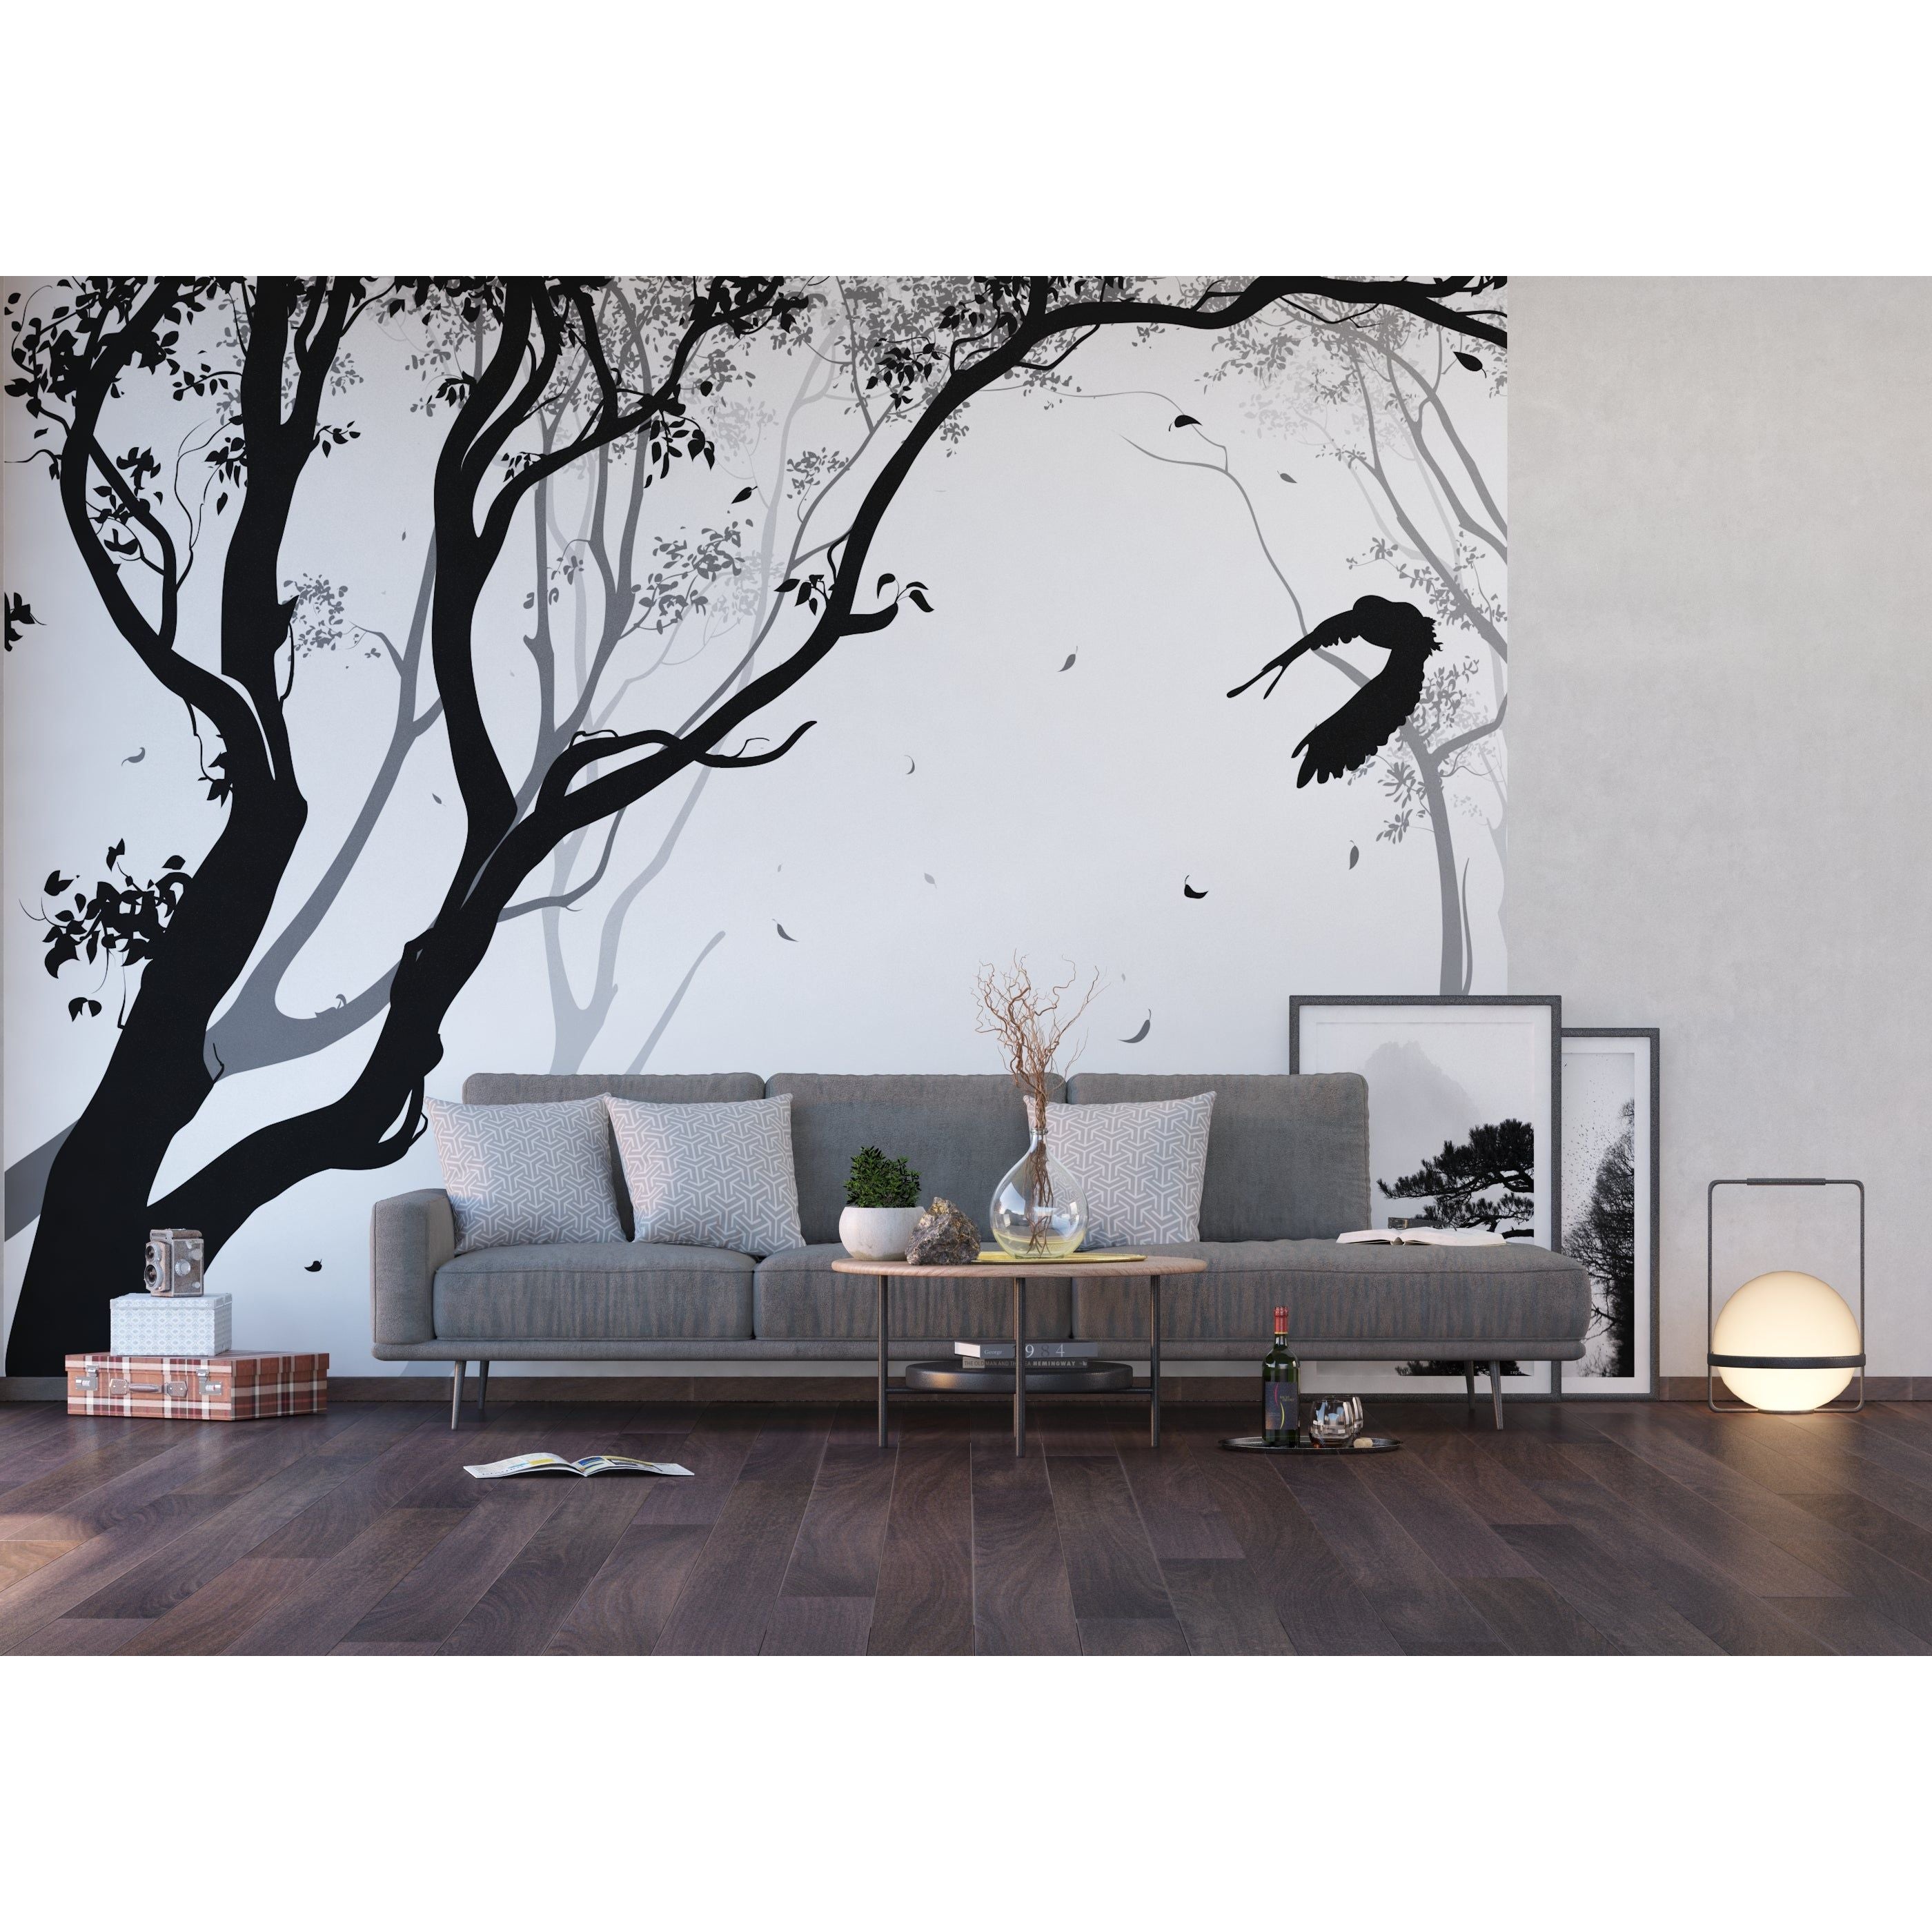 Monochrome Forest: Black & White Trees with Black Leafs Wall Mural